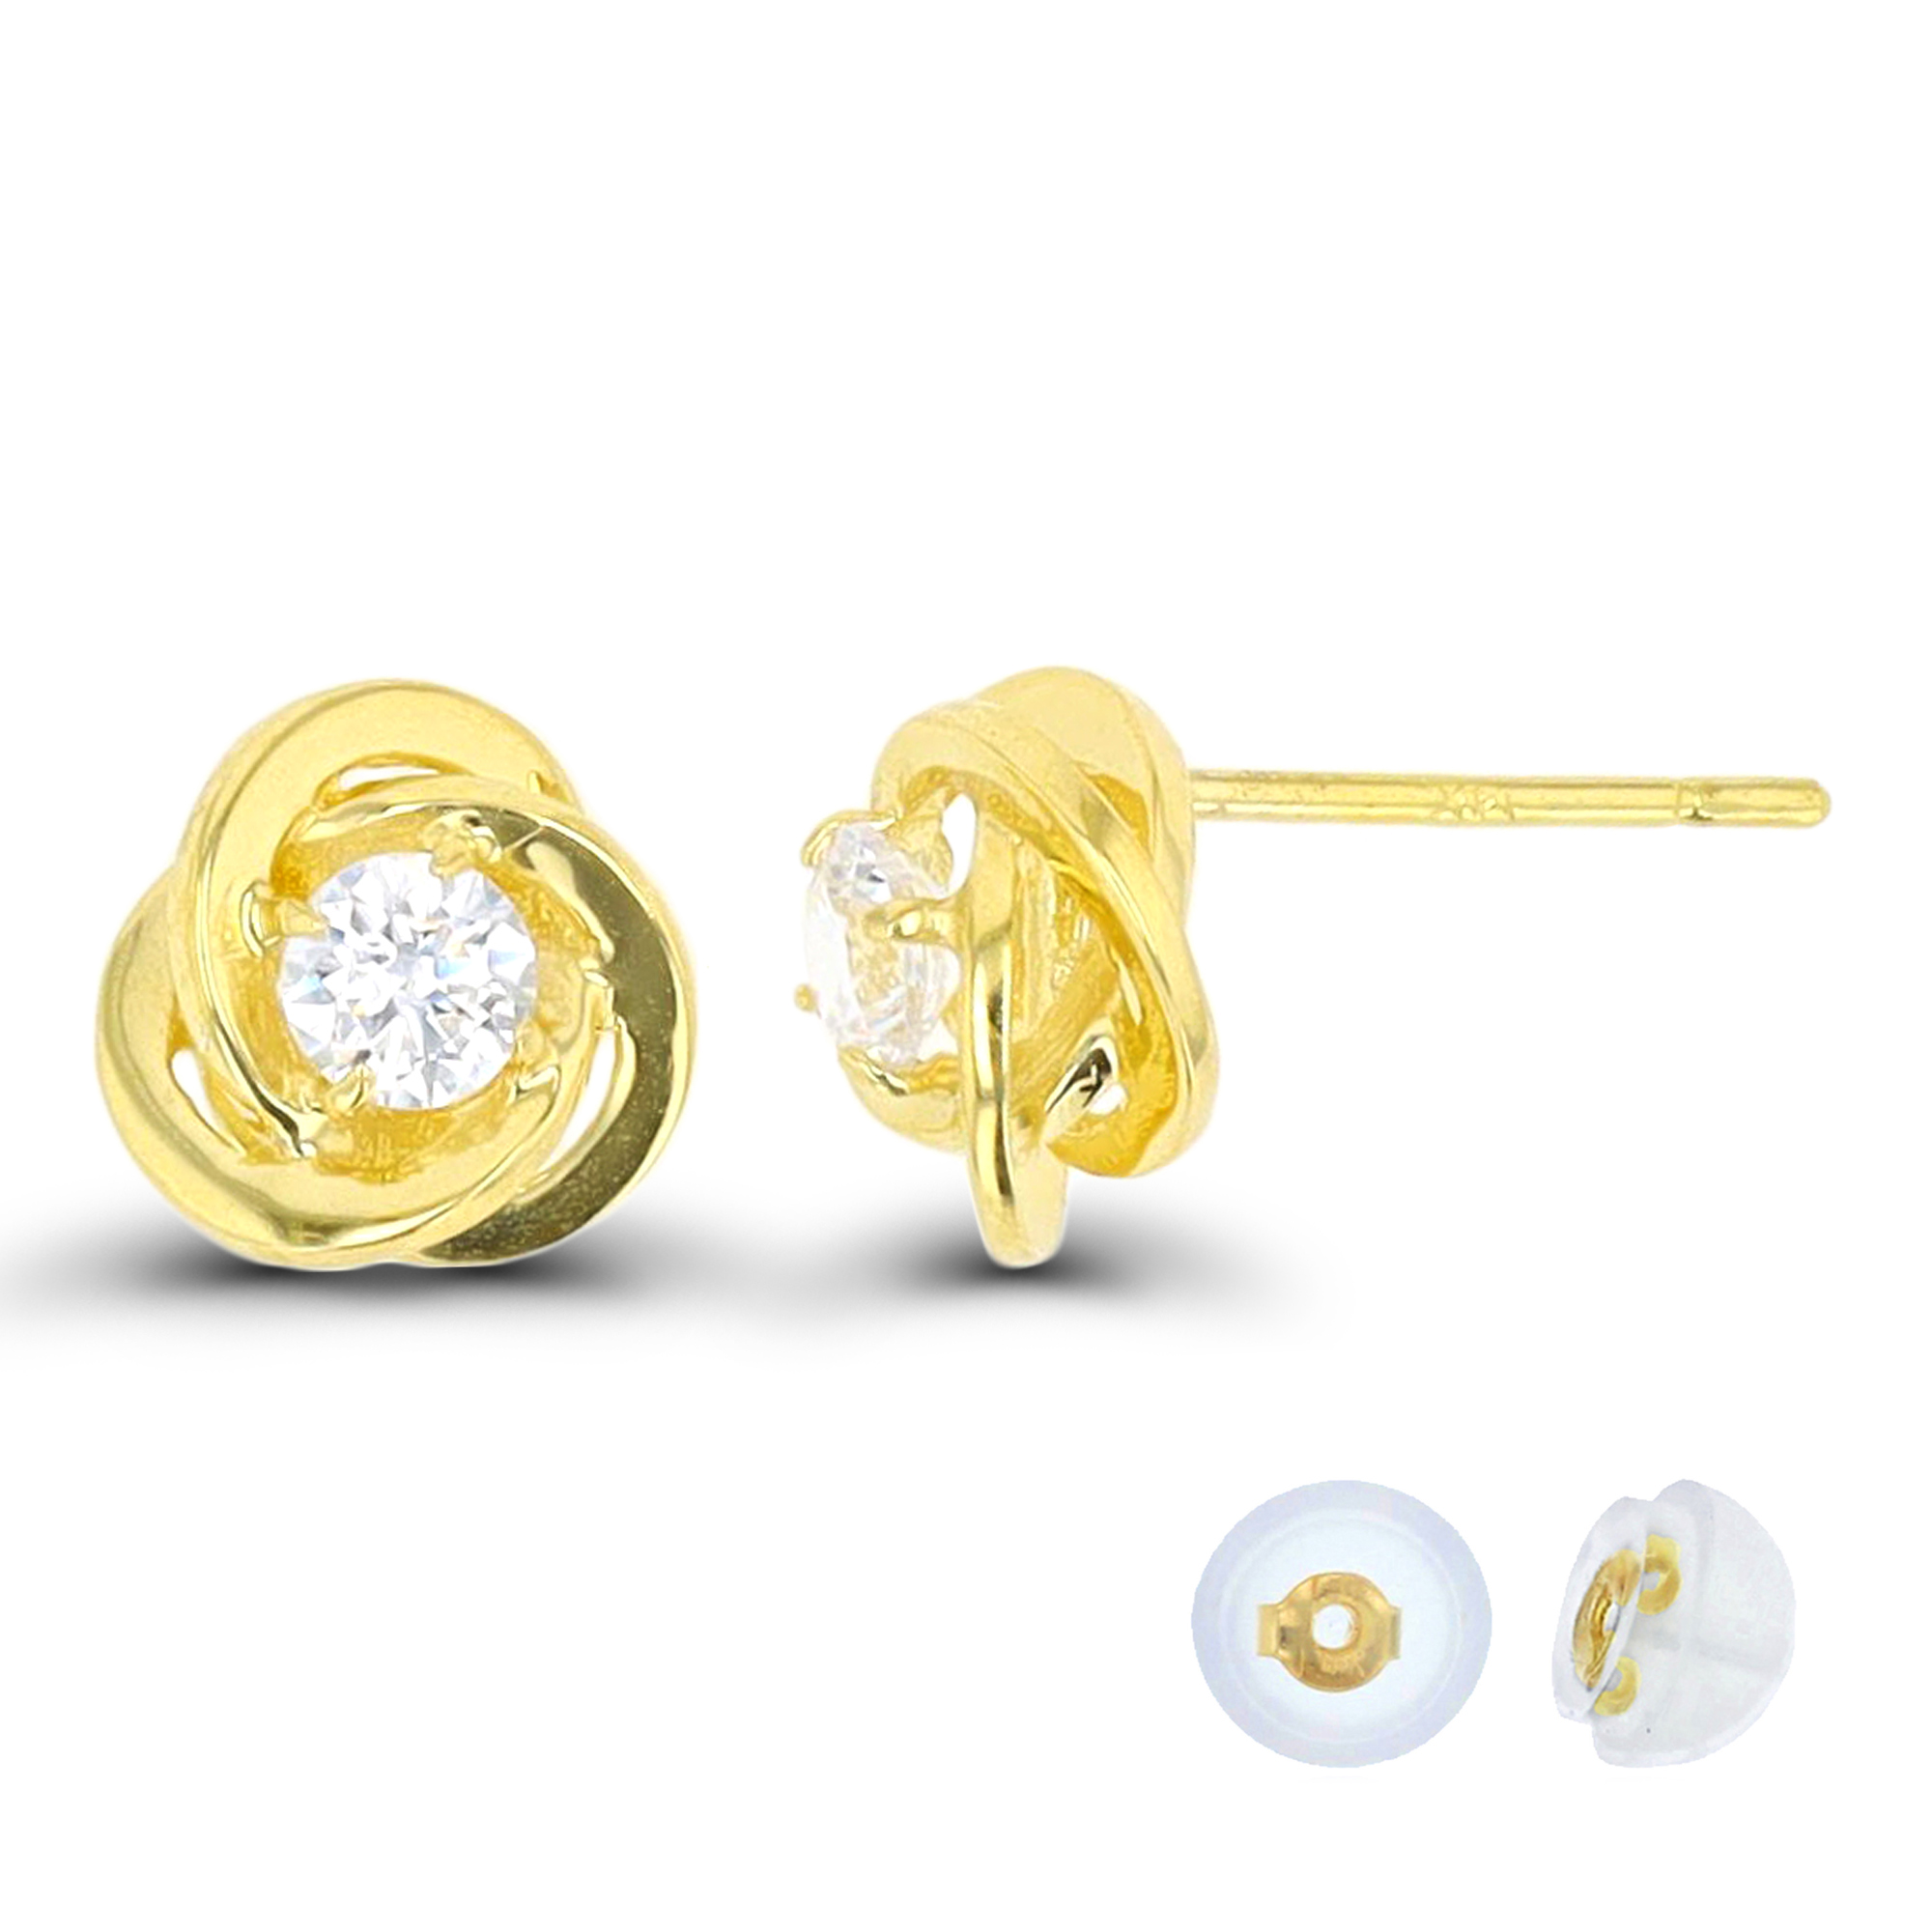 10K Yellow Gold 3mm Rd Love Knot Stud Earring with Bubble Silicone Back